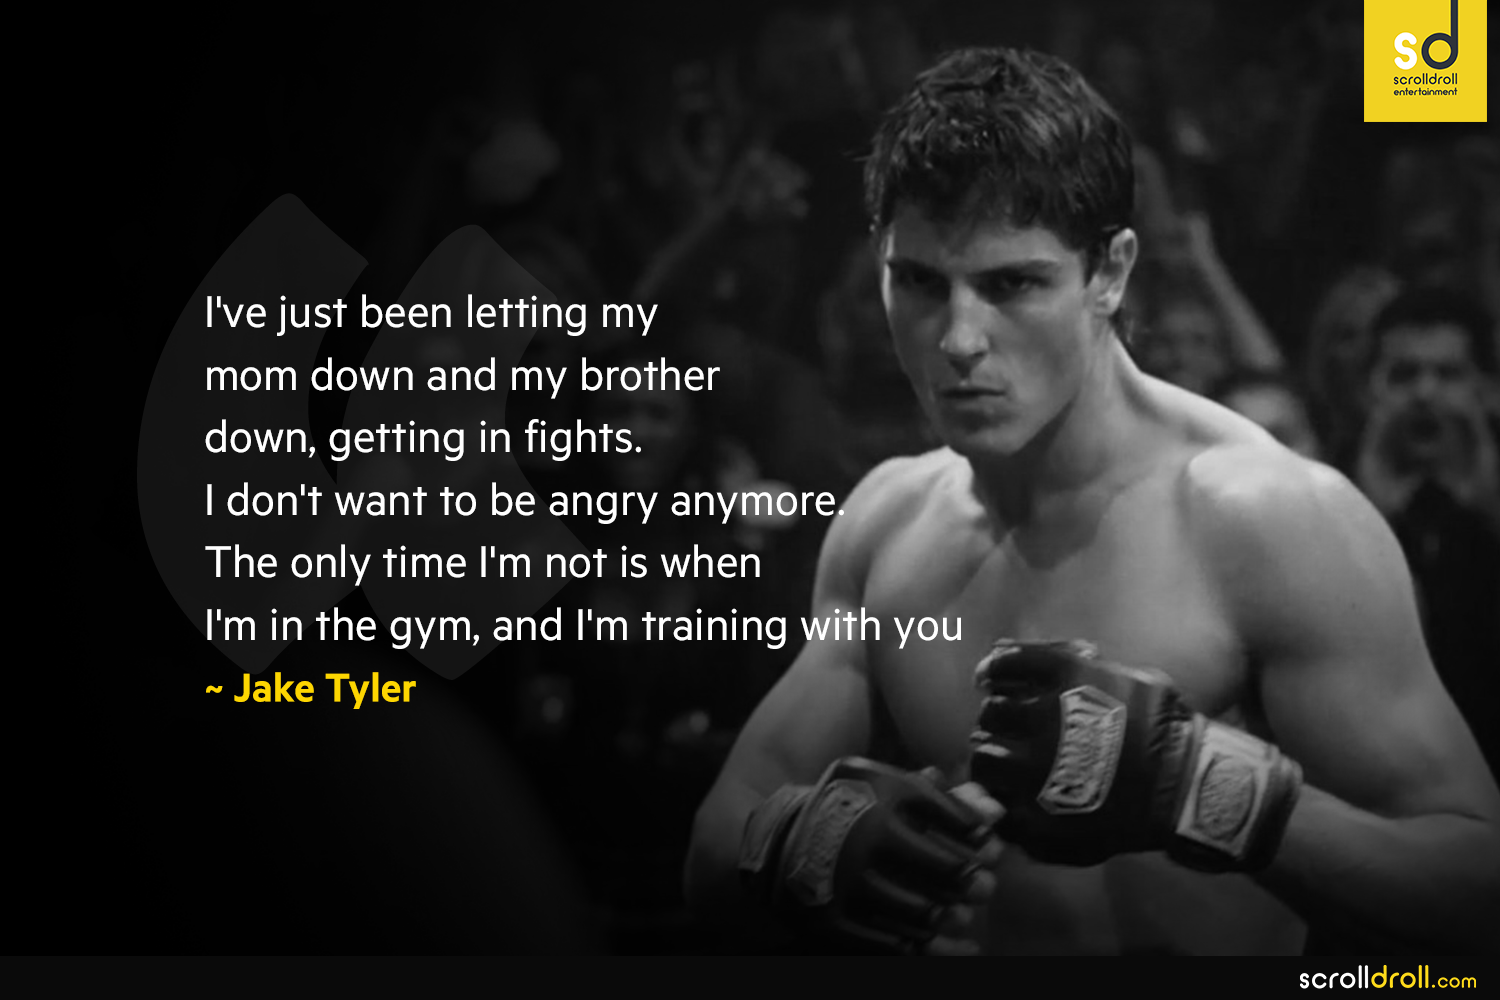 Never Back Down Quotes Jake Tyler